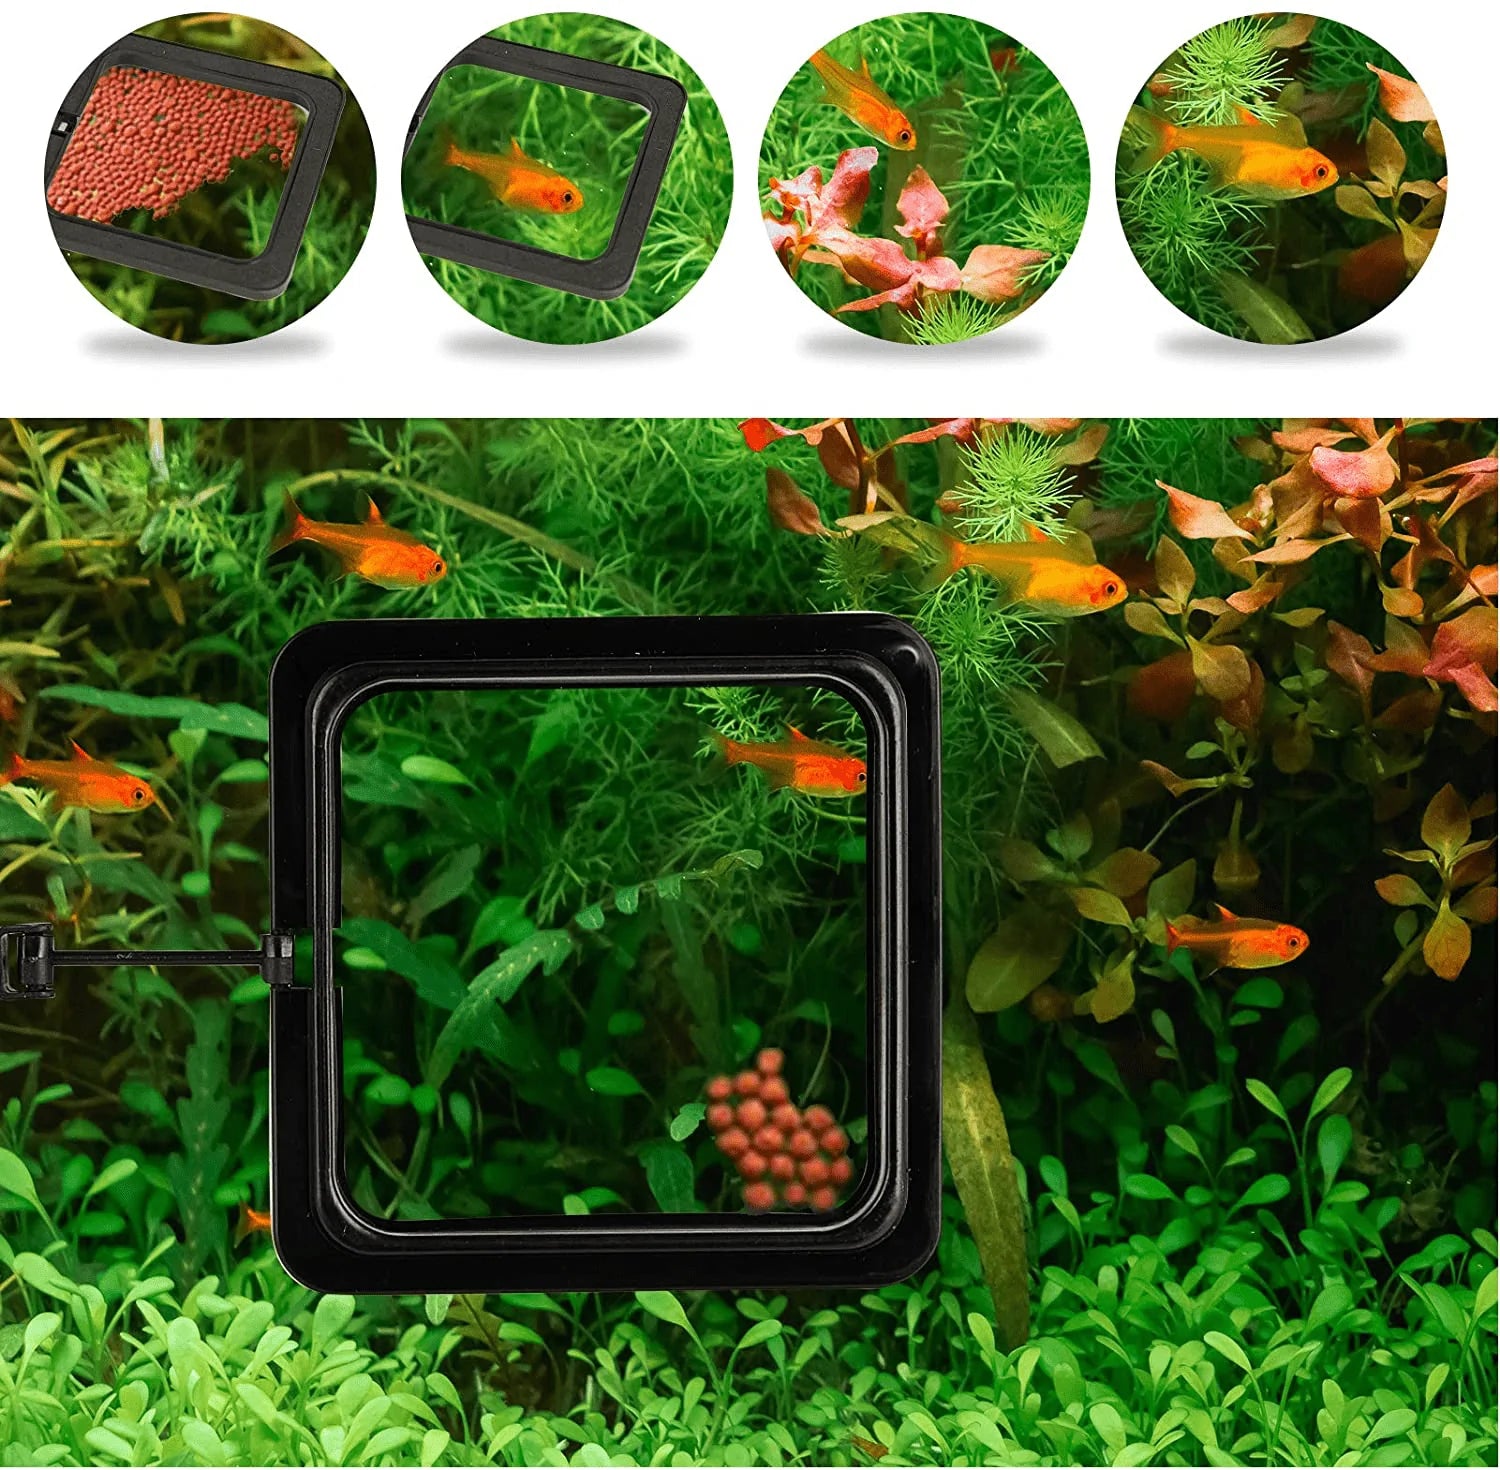 ZRDR Fish Feeding Ring, 2 Pack Black Aquarium Floating Food Feeder Circle Small round and Square with Flexible Lever Suitable and Suction Cup, Reduces Fish Feeder Waste and Maintains Water Quality